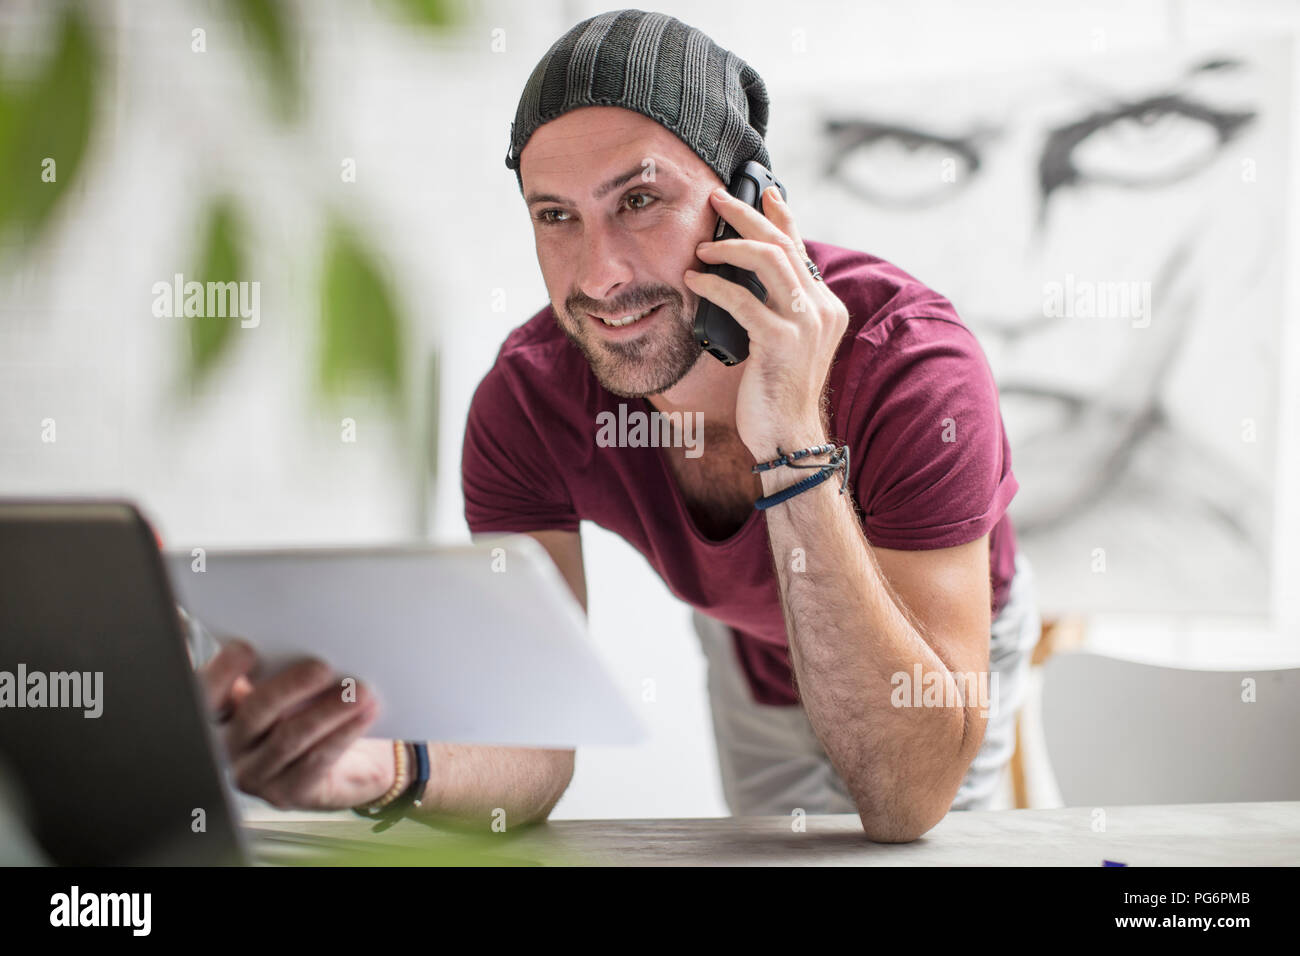 Artist using tablet and cell phone in studio Stock Photo